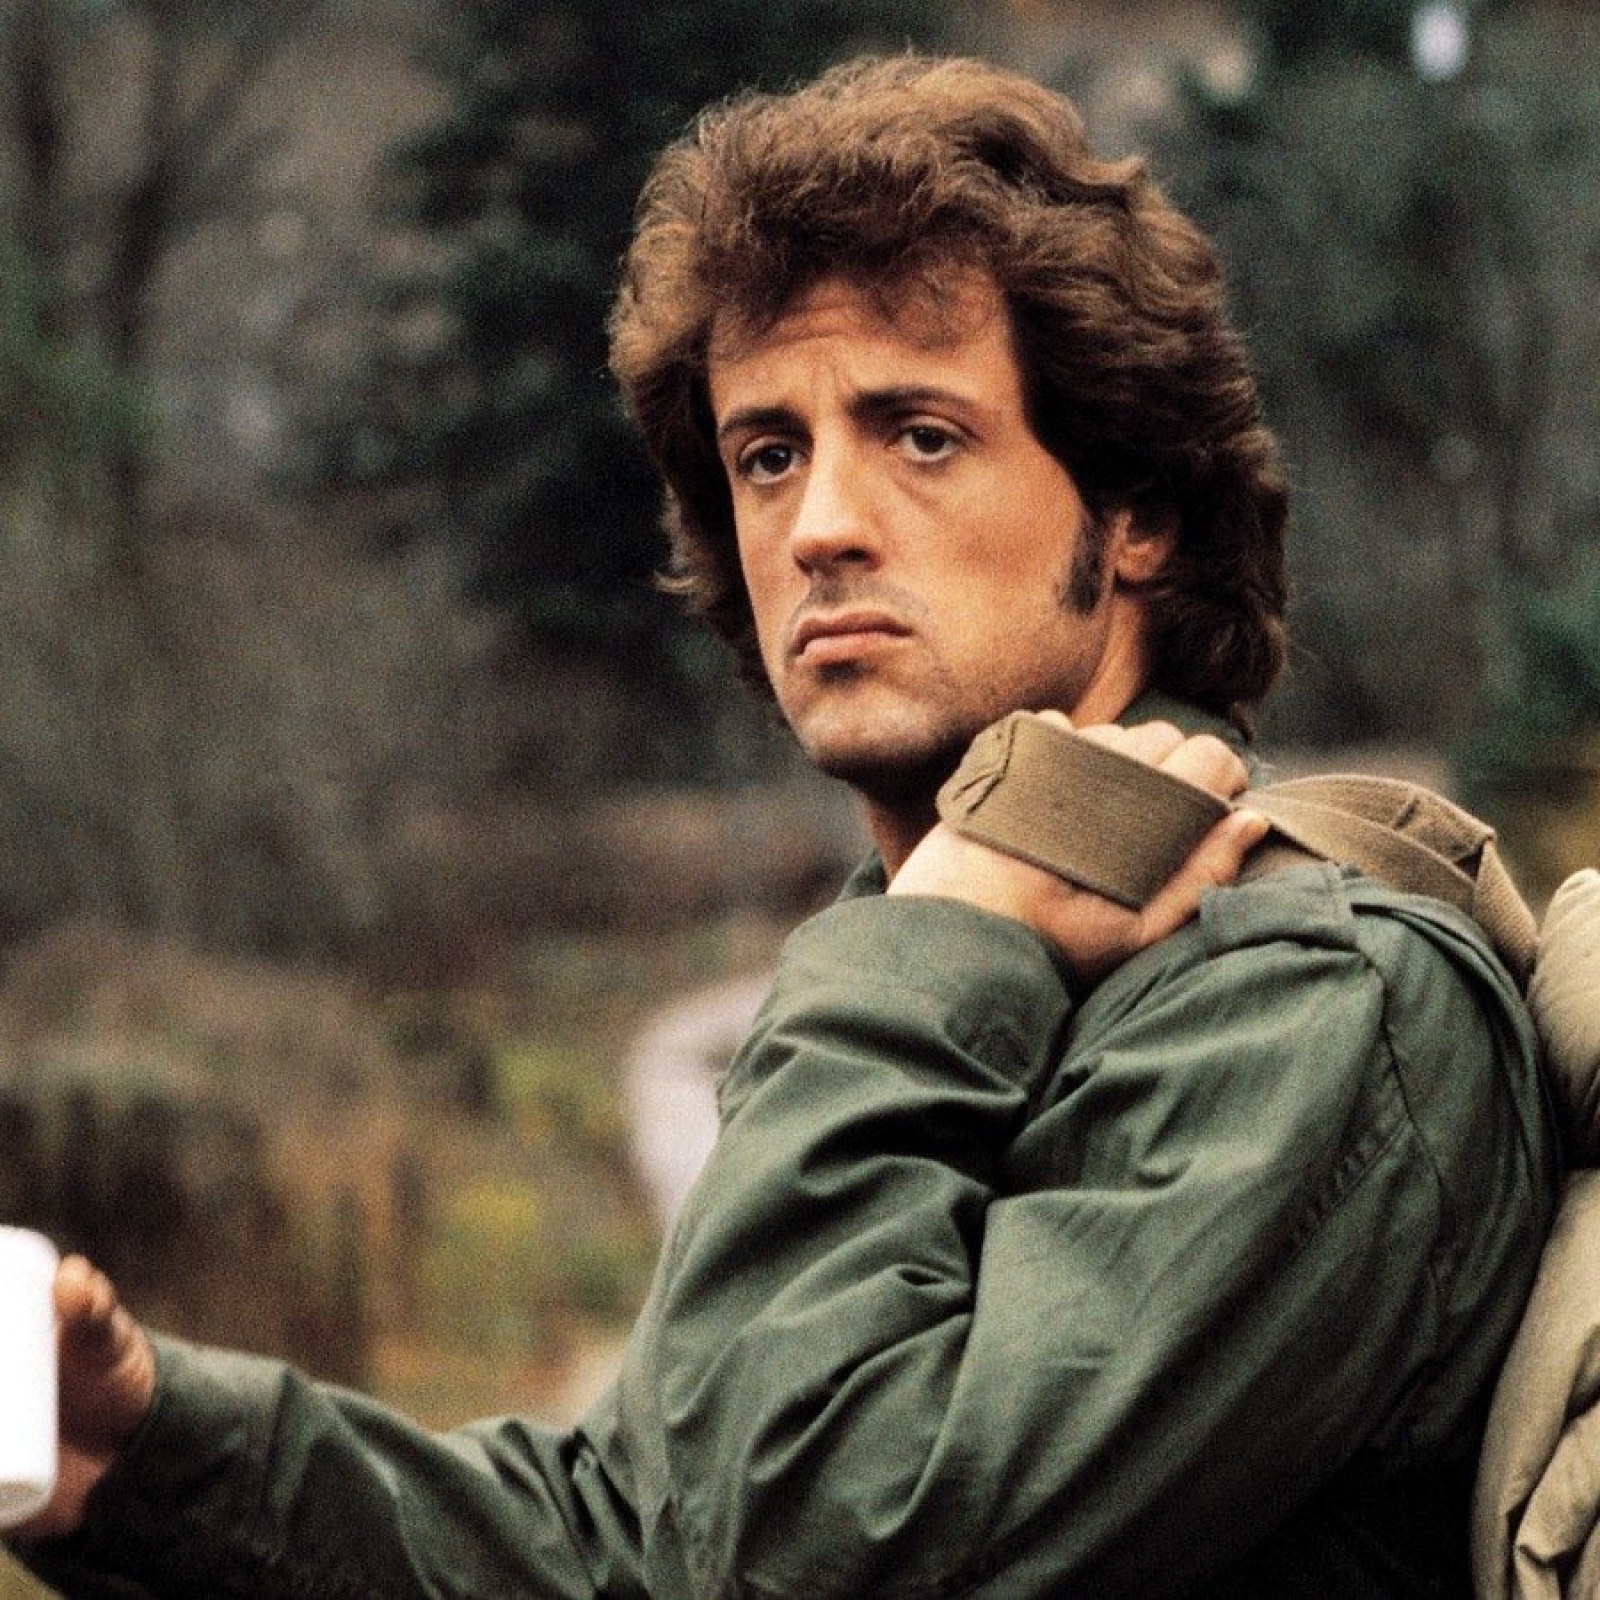 Sylvester stallone young life